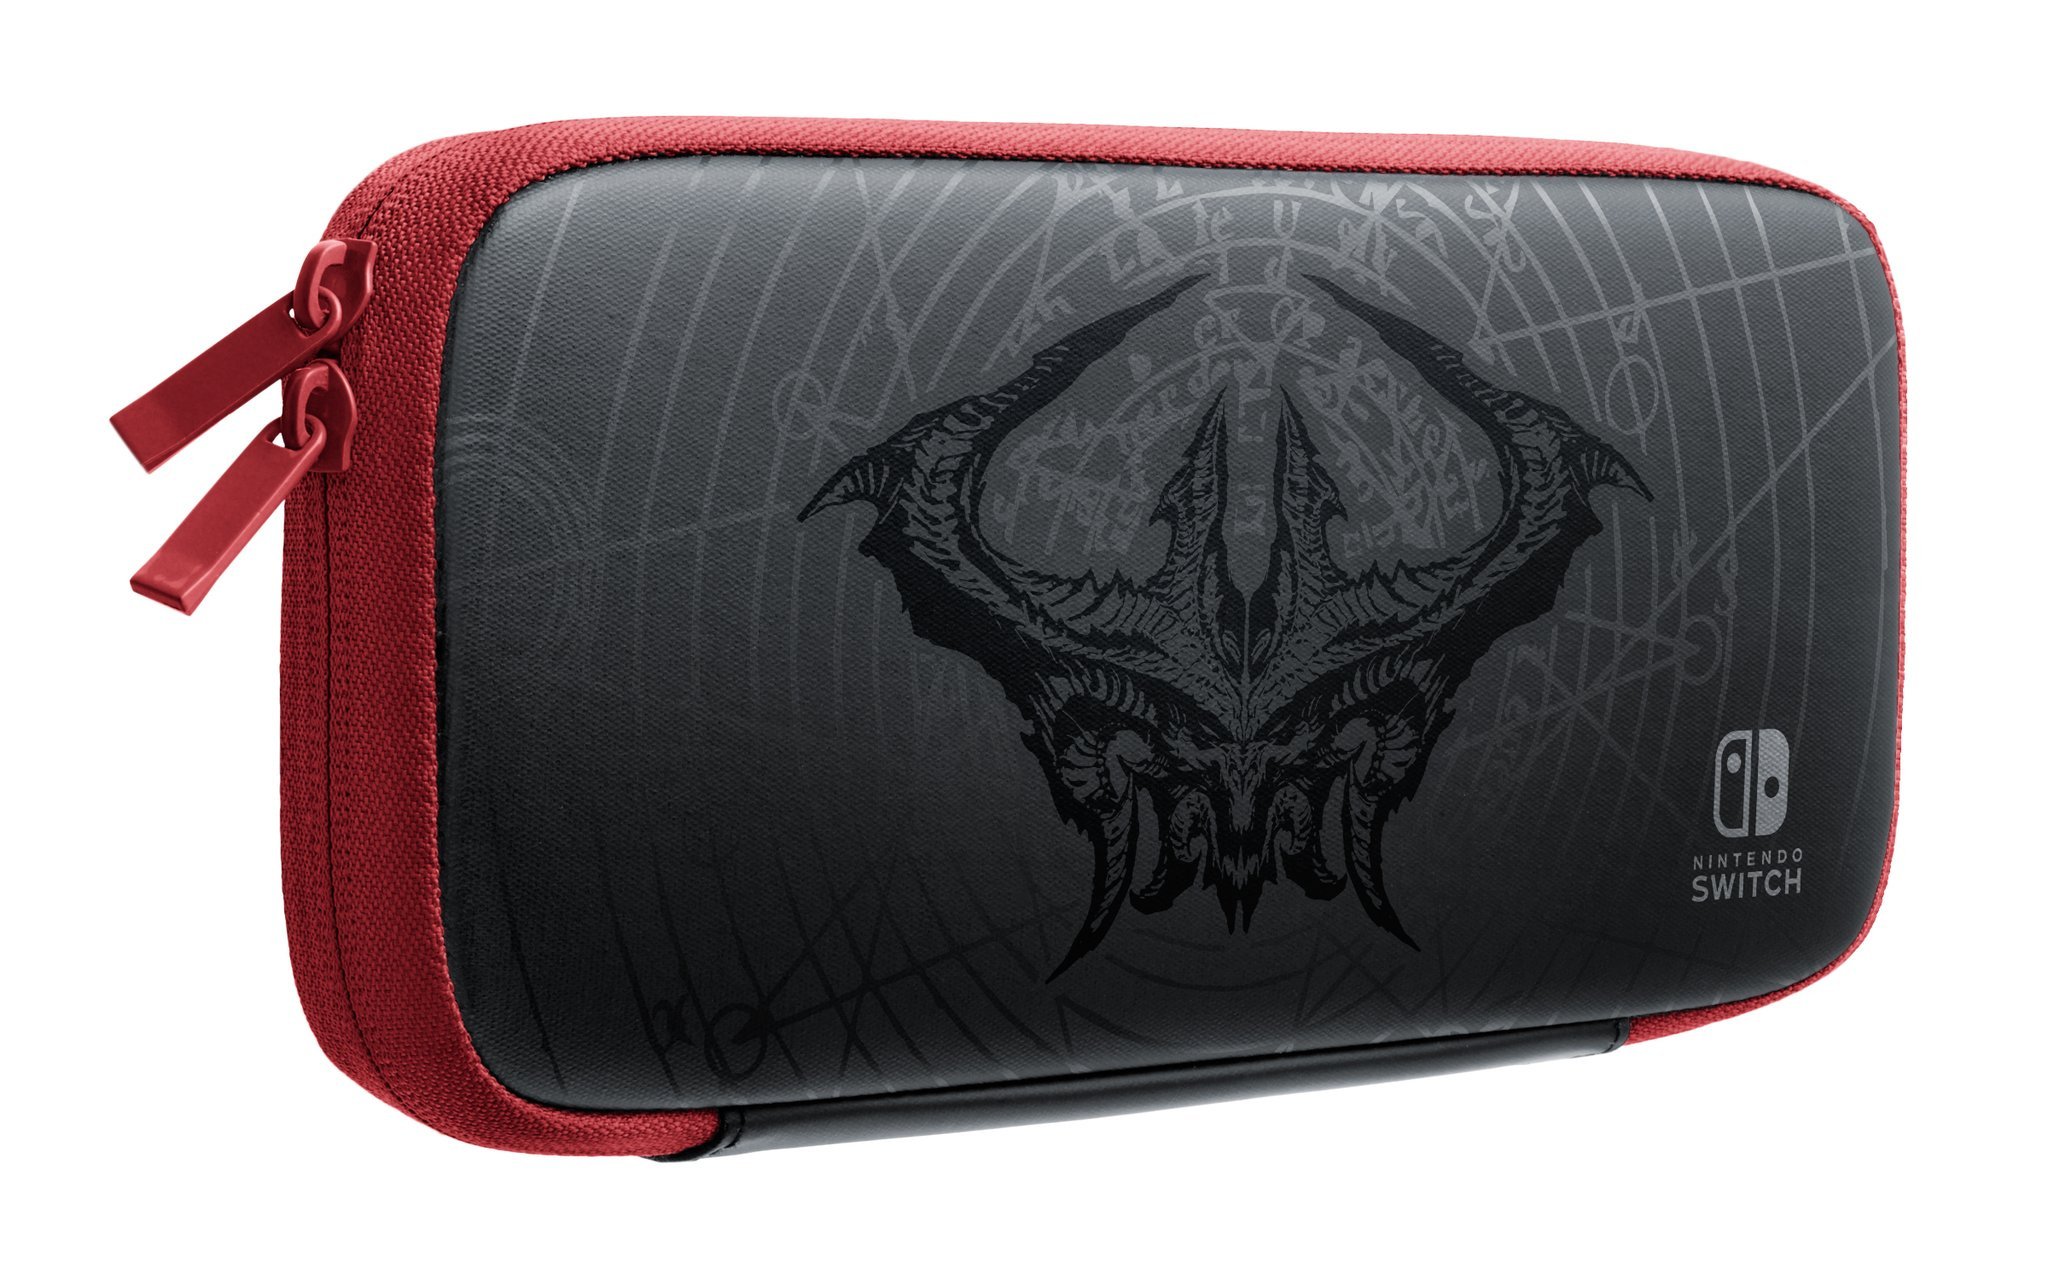 diablo 3 limited edition switch